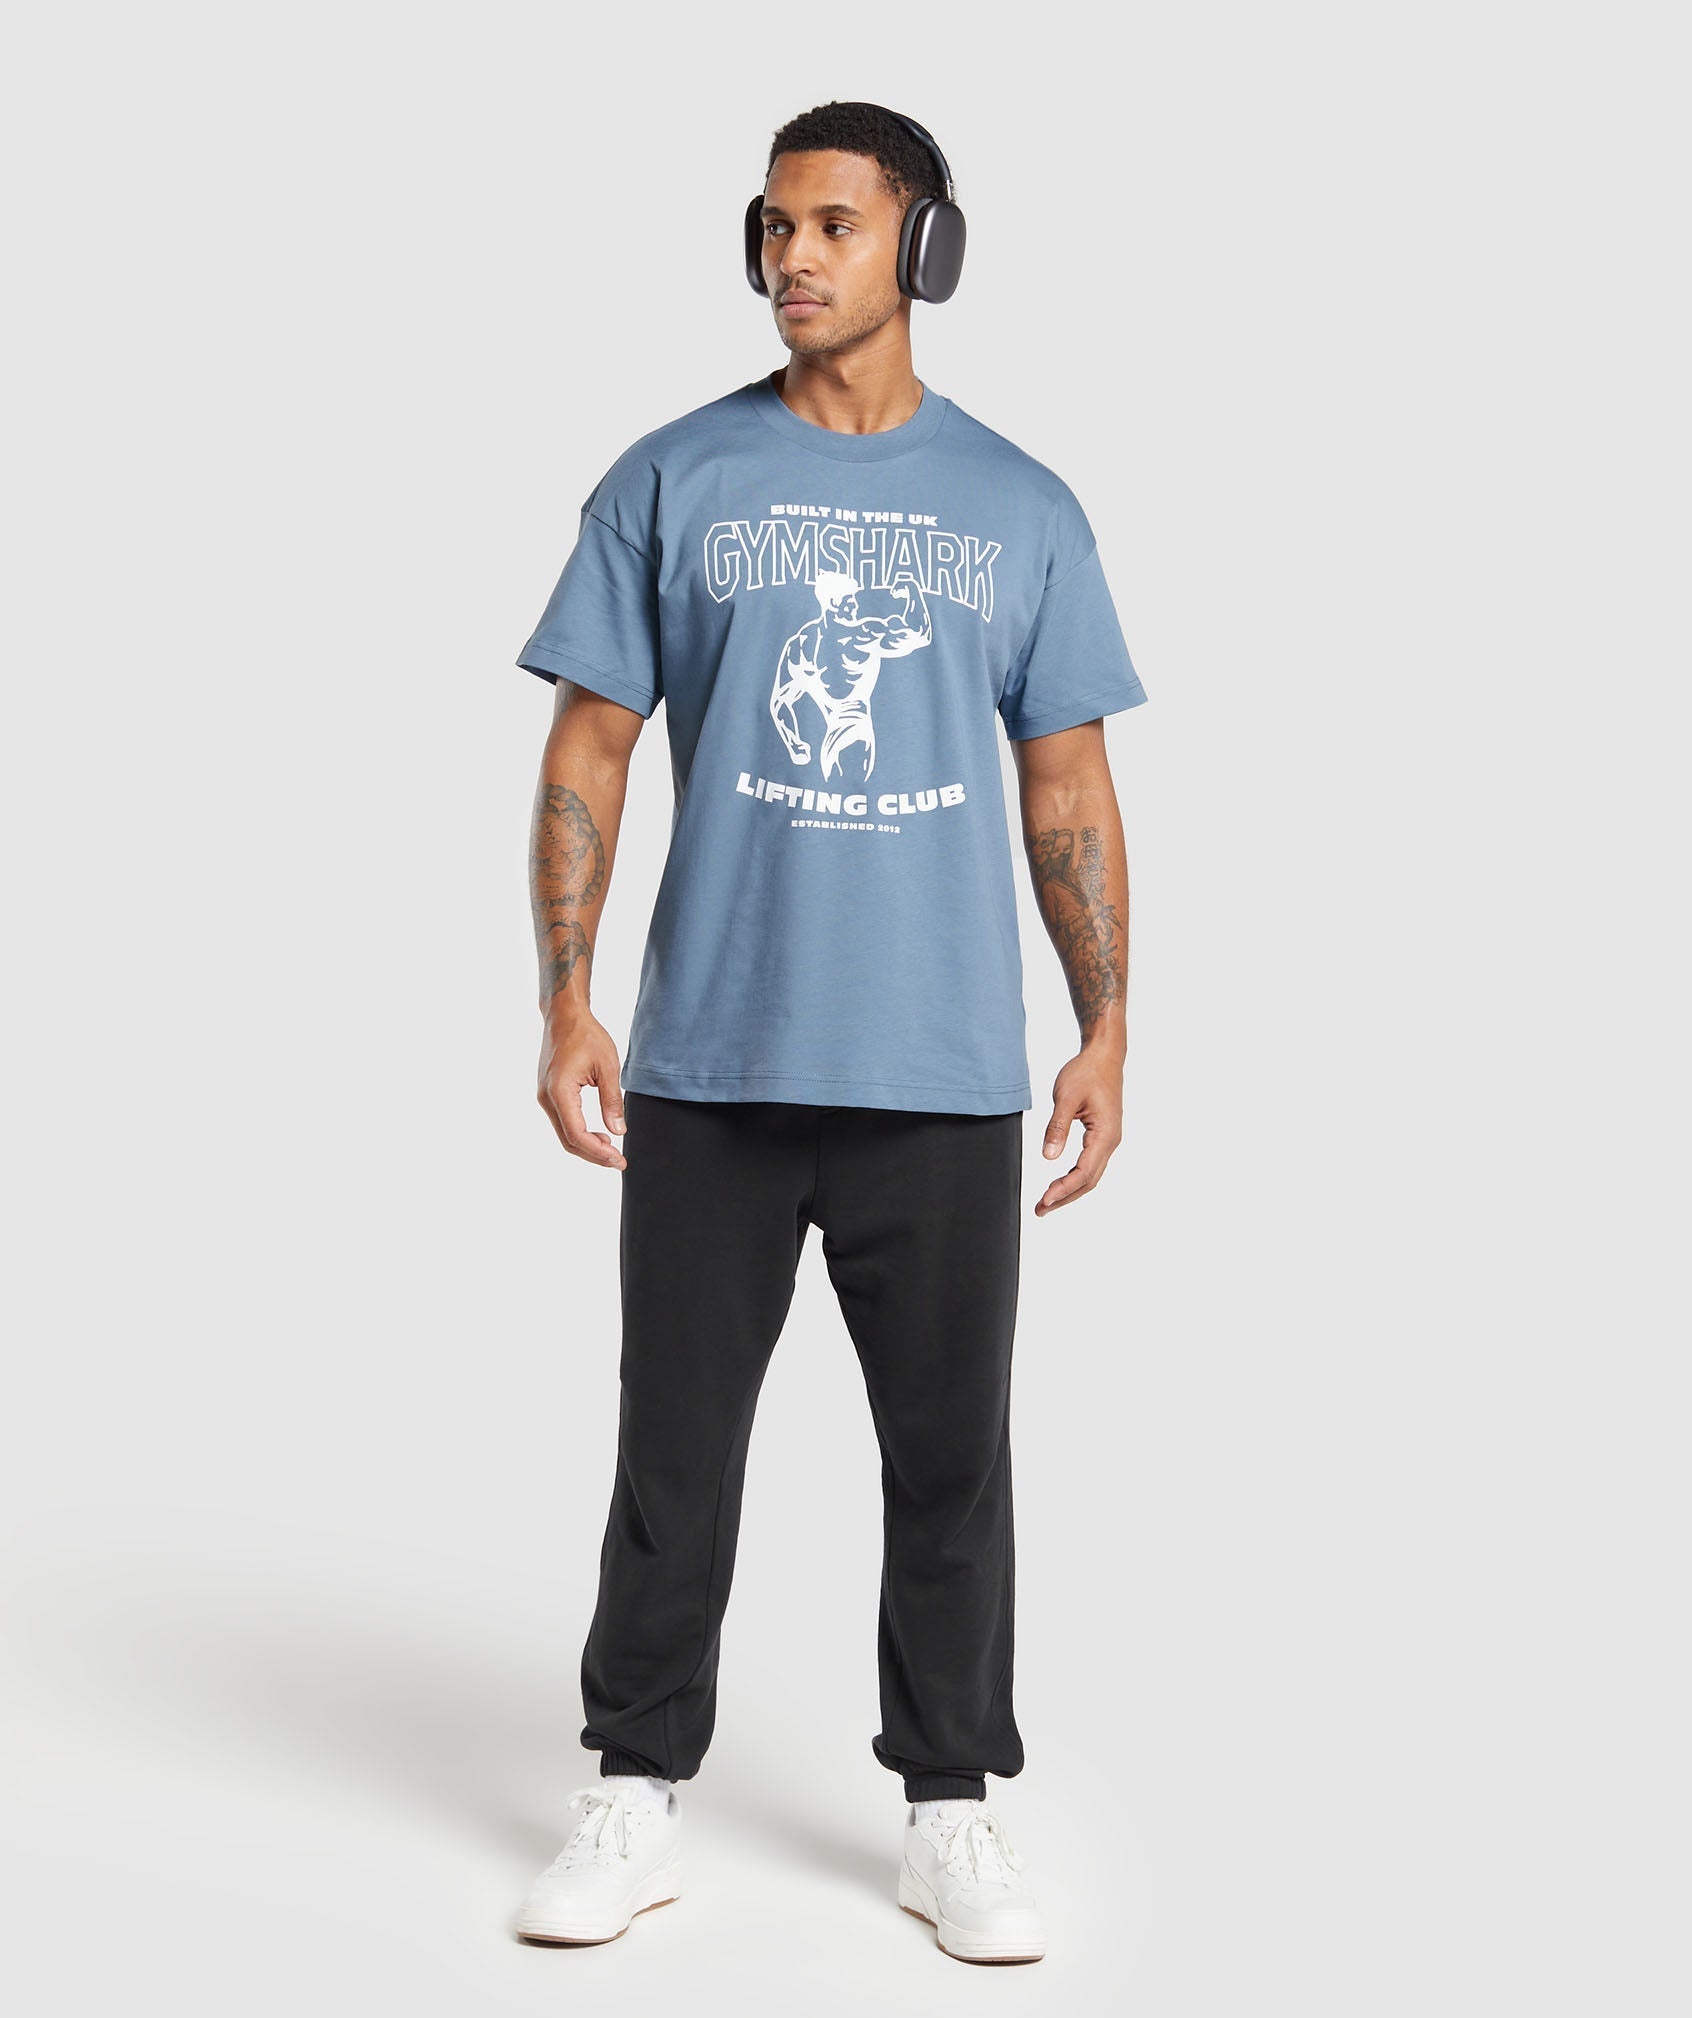 Built in the UK T-Shirt in Faded Blue - view 4